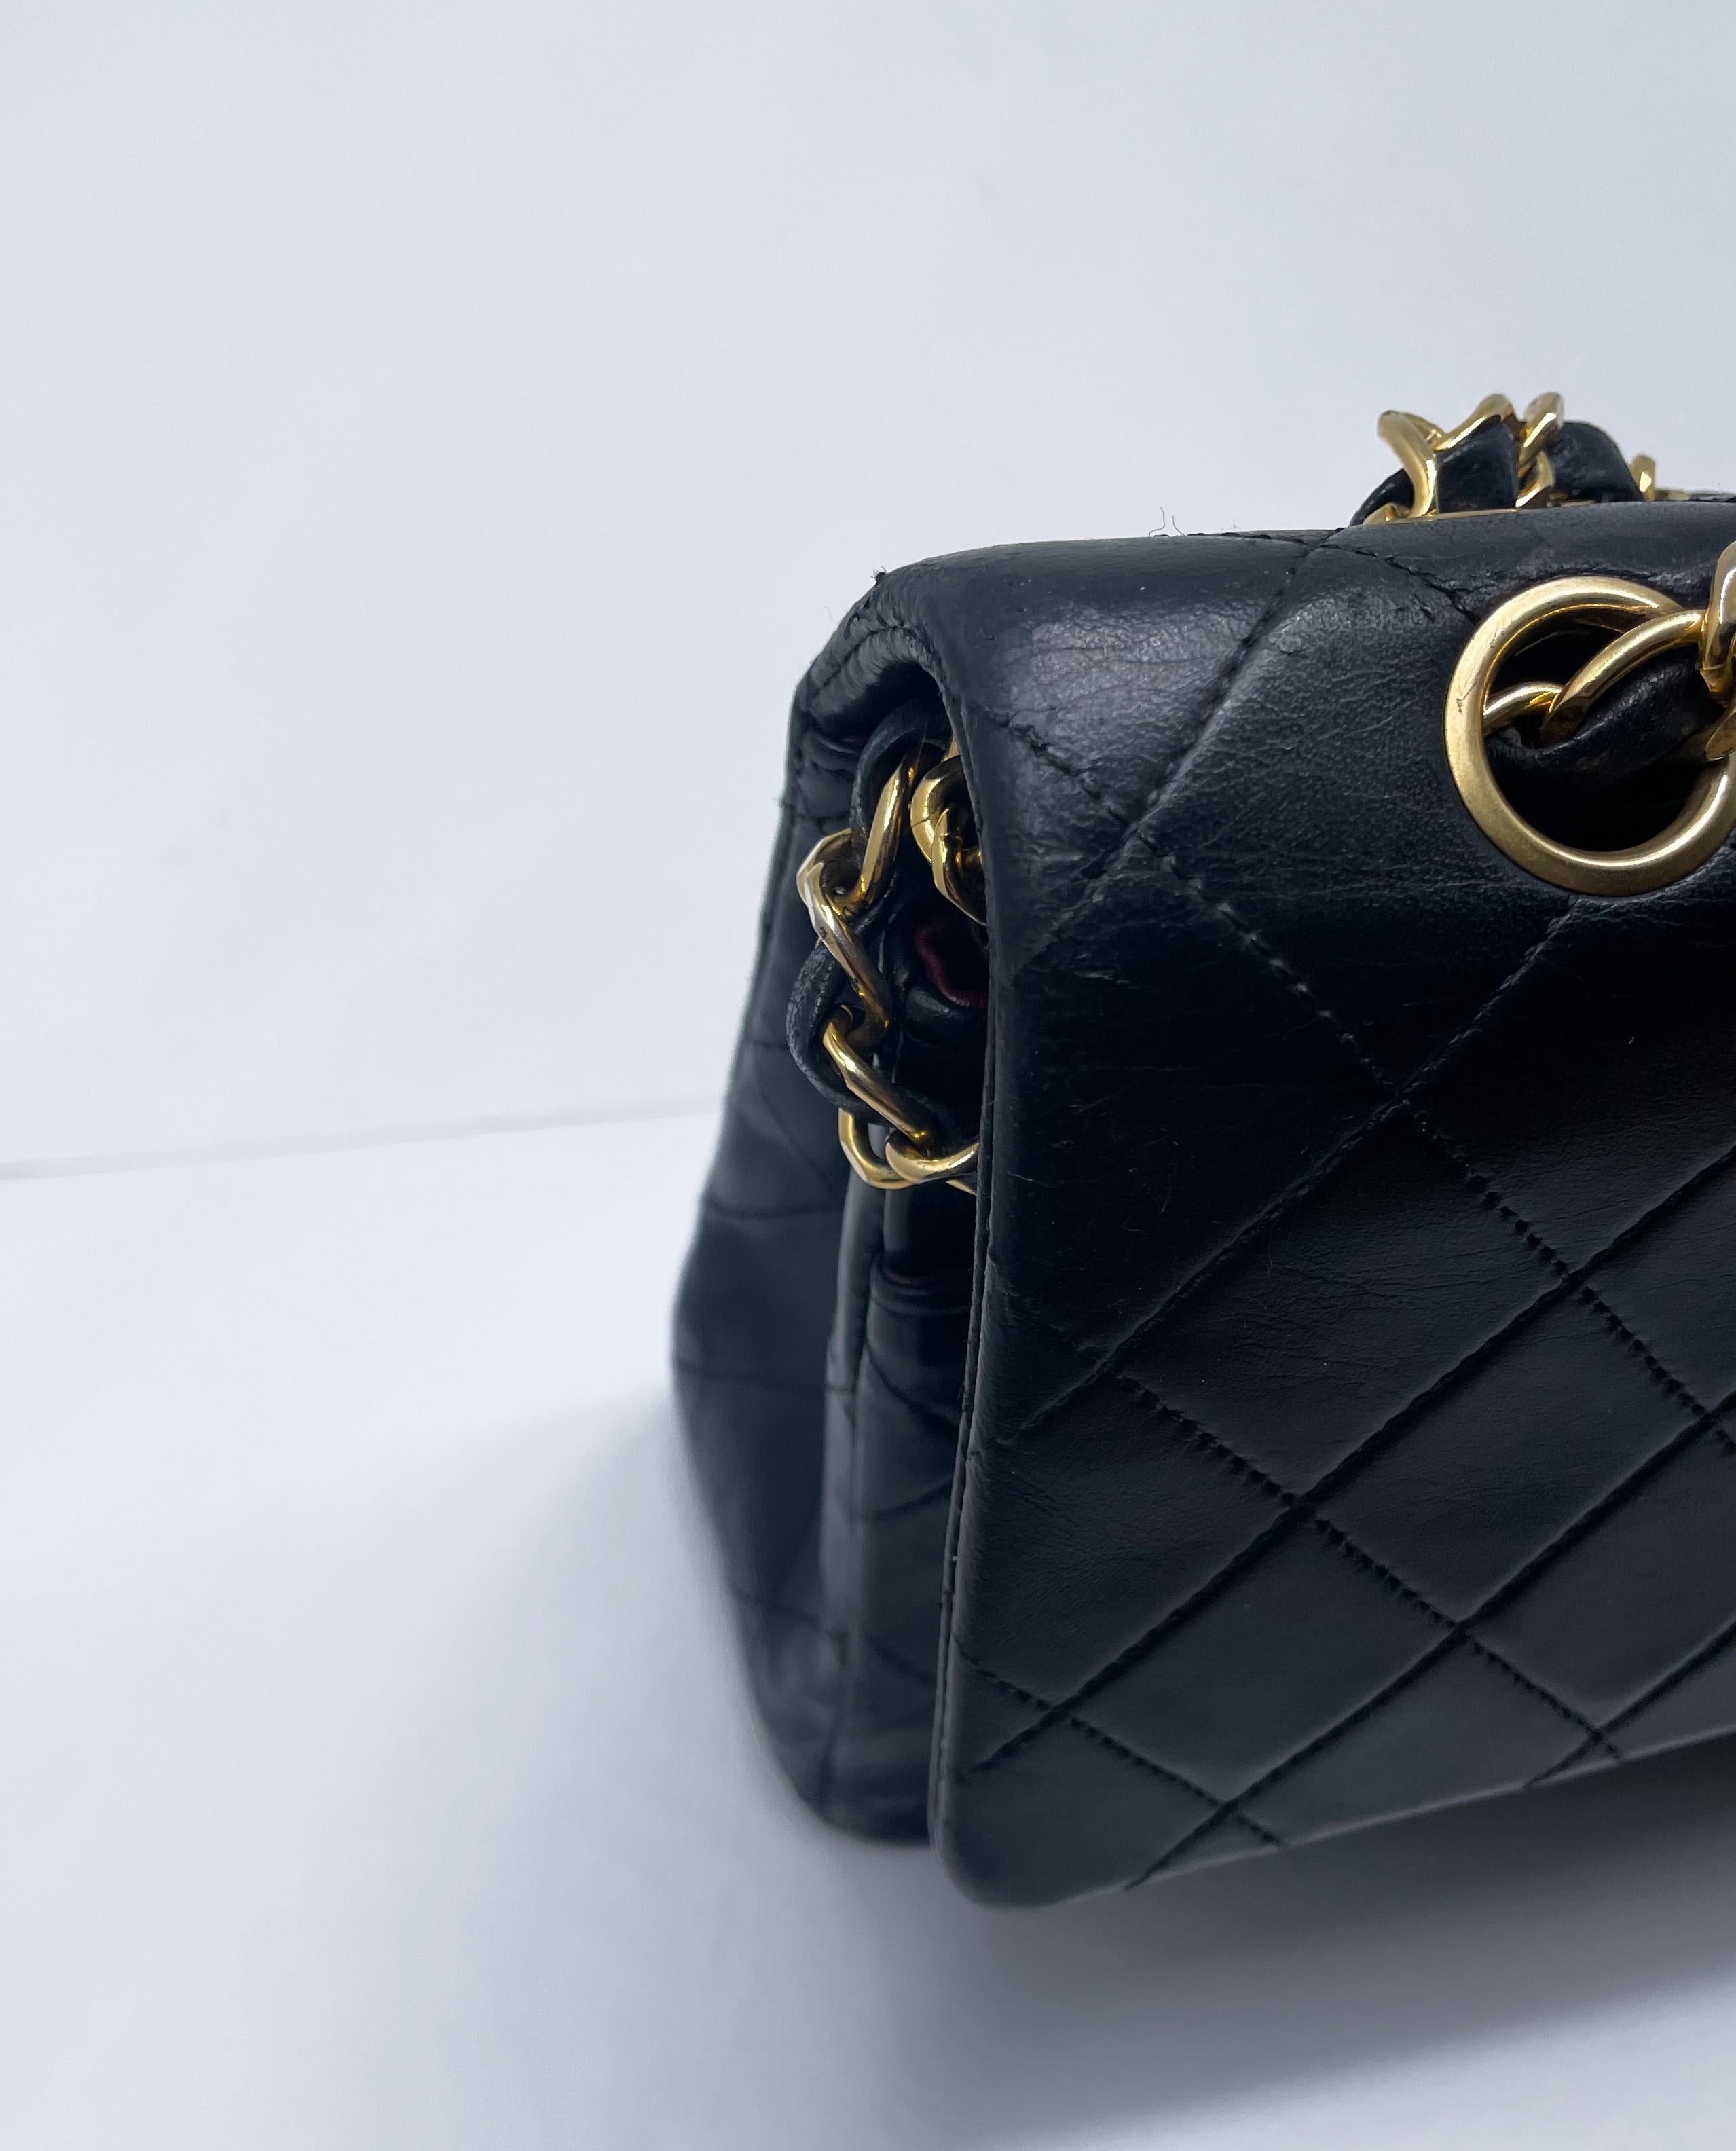 Chanel Classique handbag in black lambskin and 24-carat plated gold metal For Sale 3